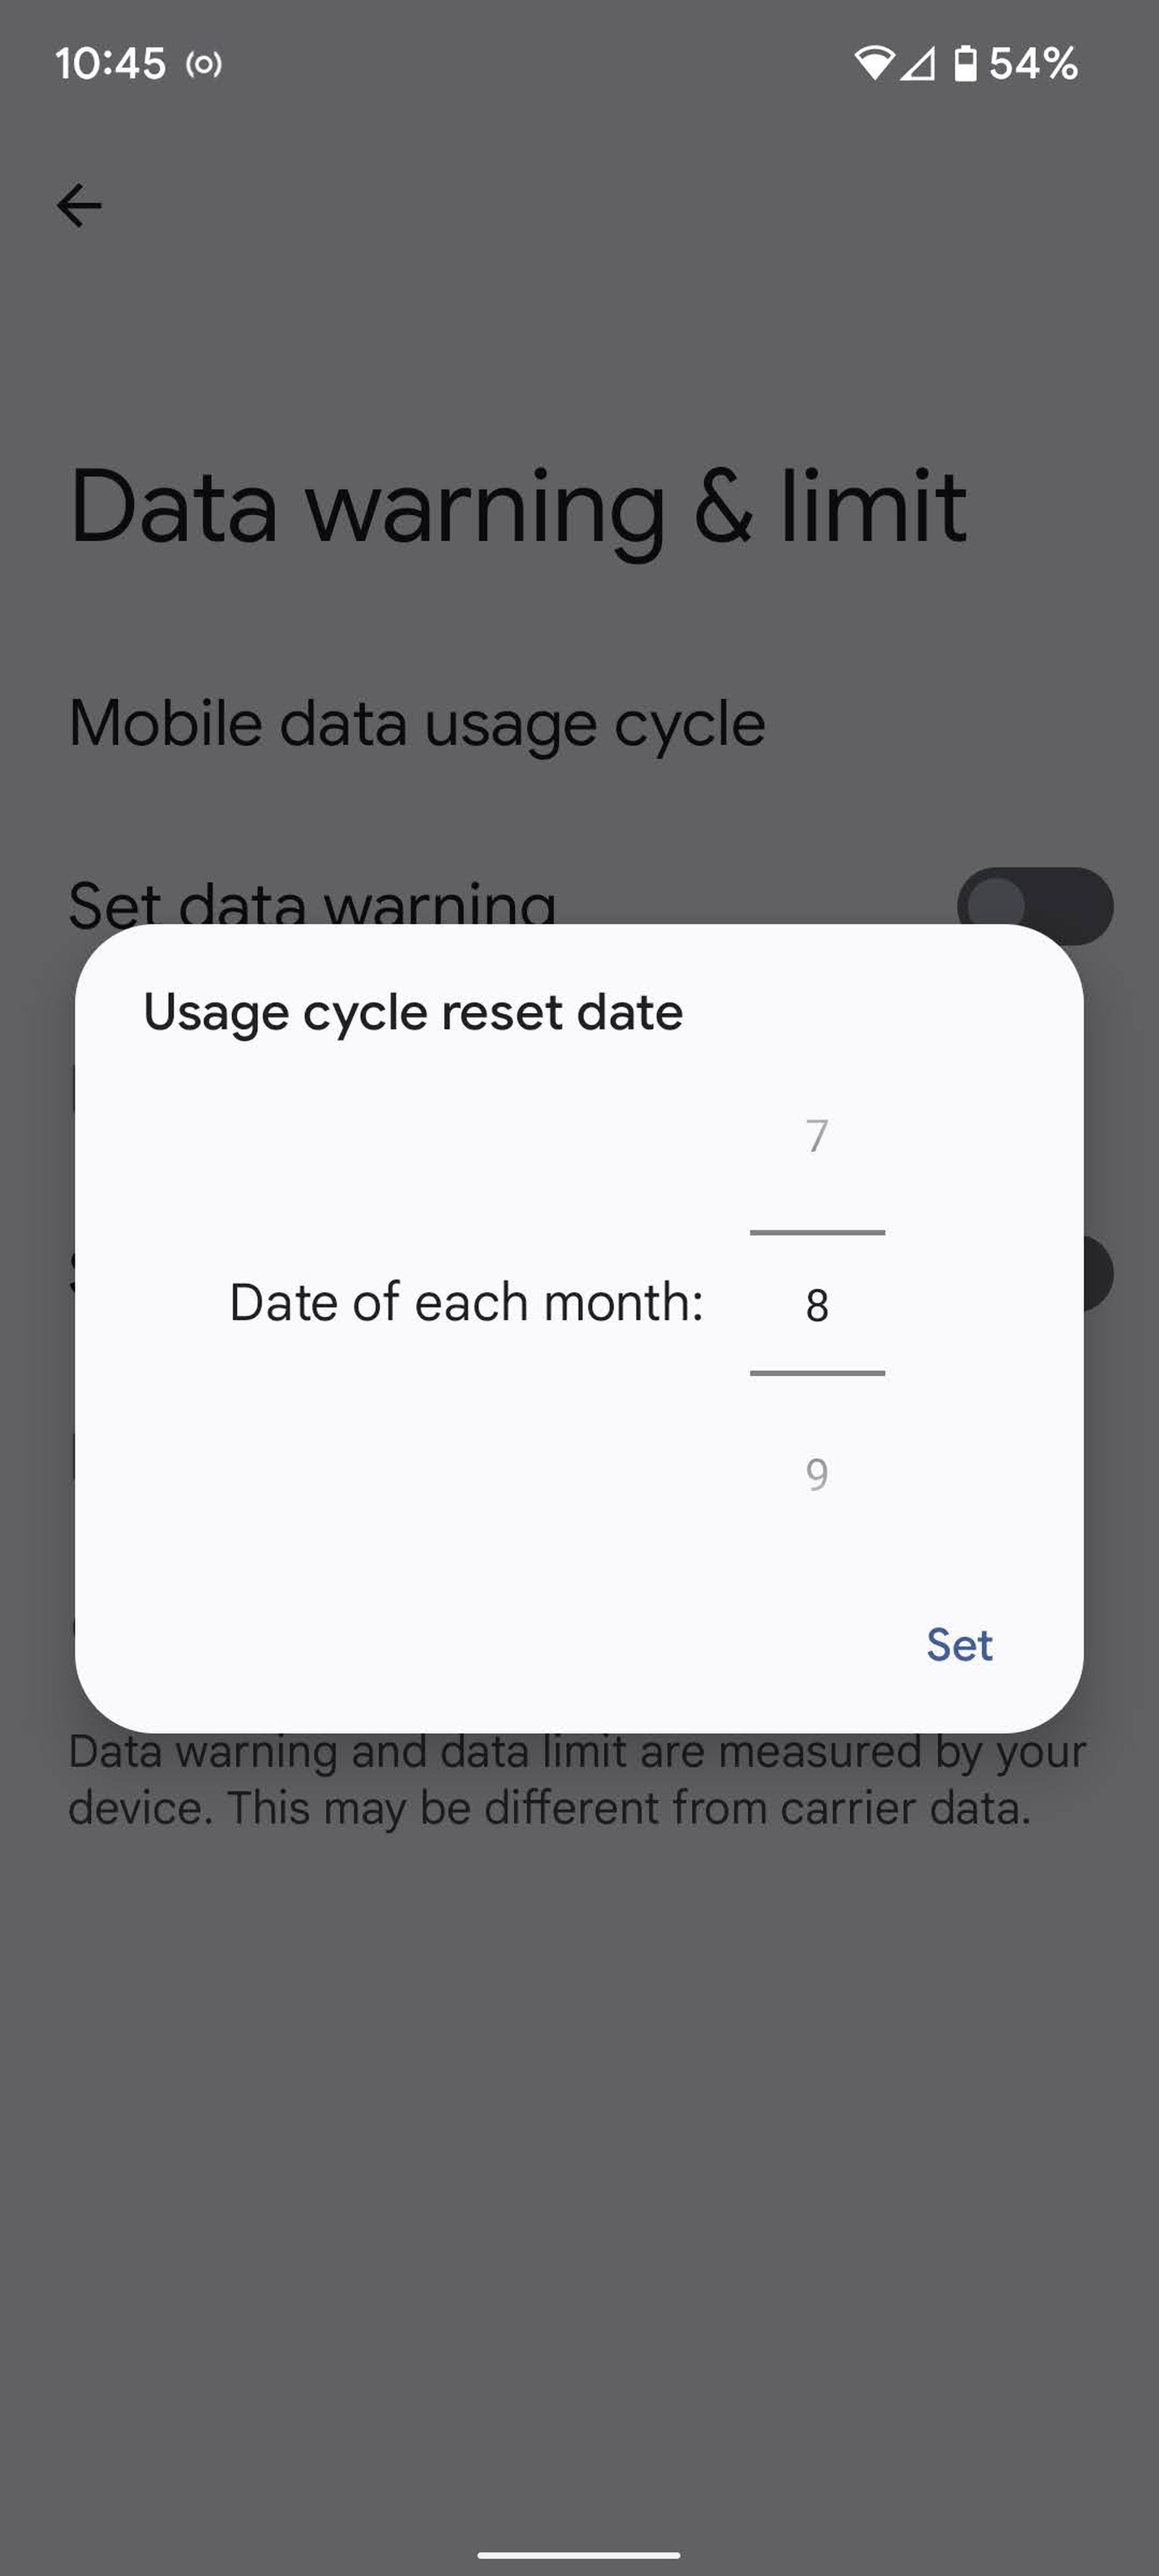 You can tweak the start date for each data month.